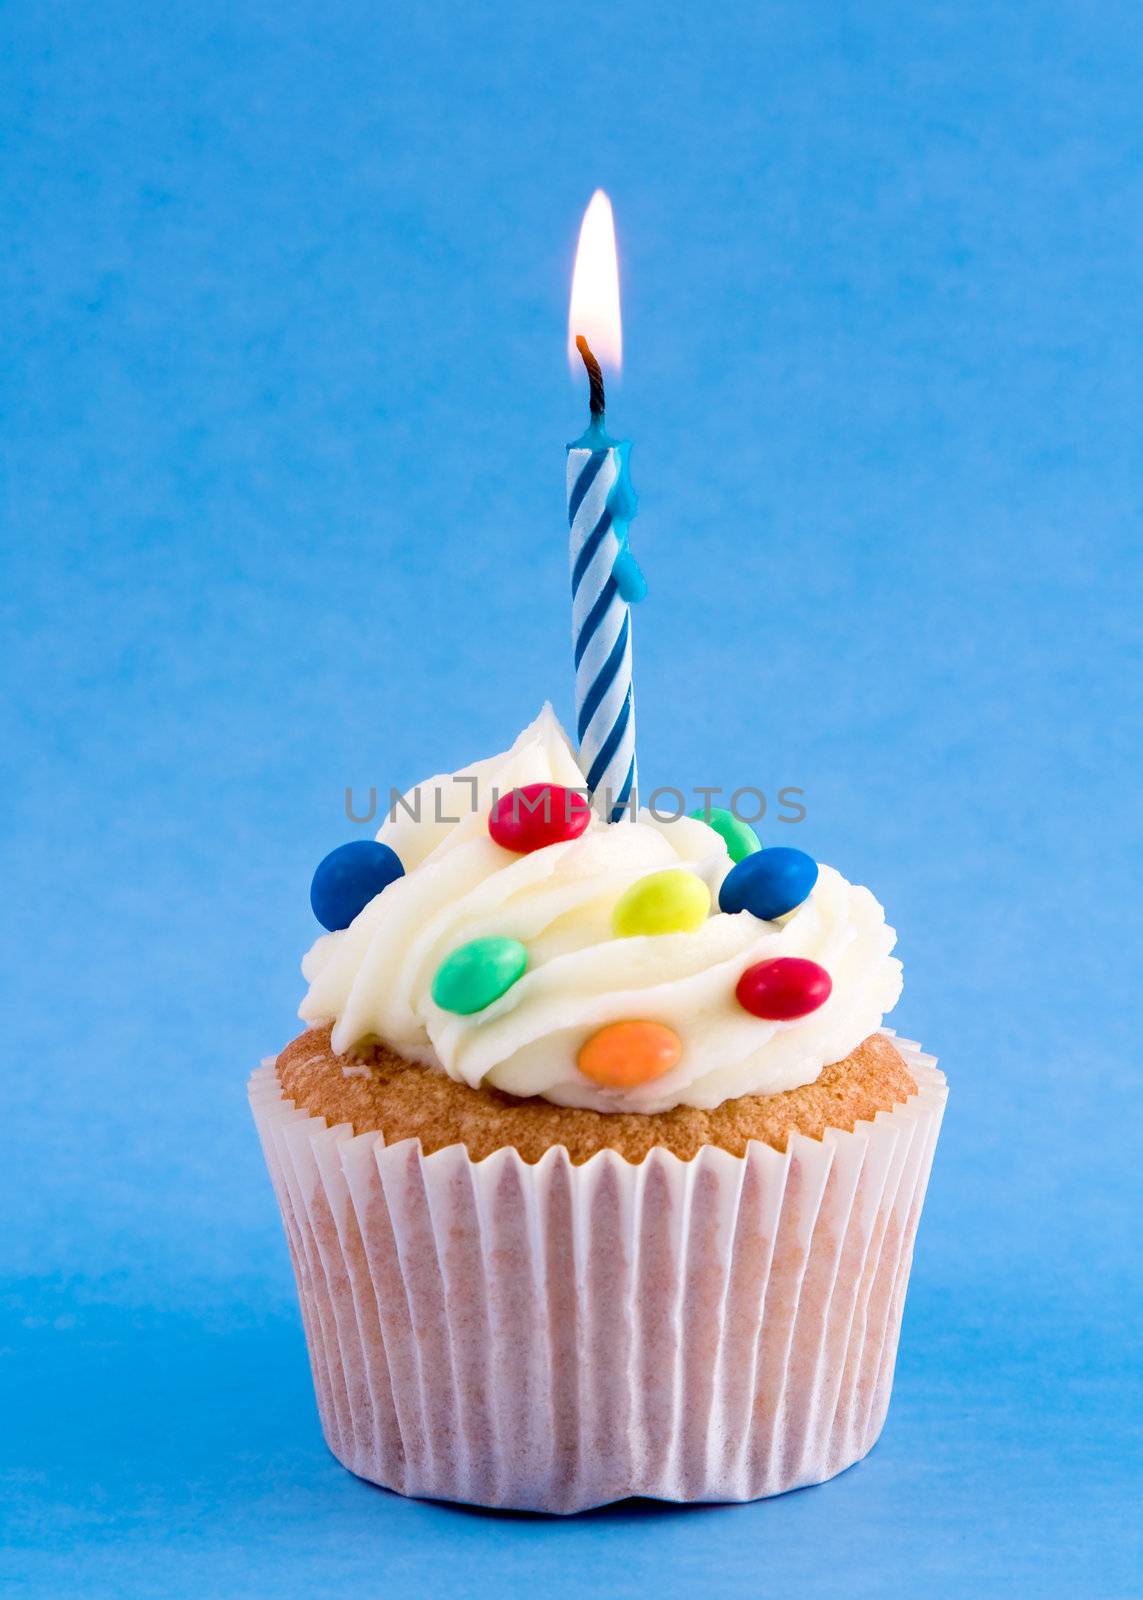 Birthday cupcake decorated with candy and a single candle